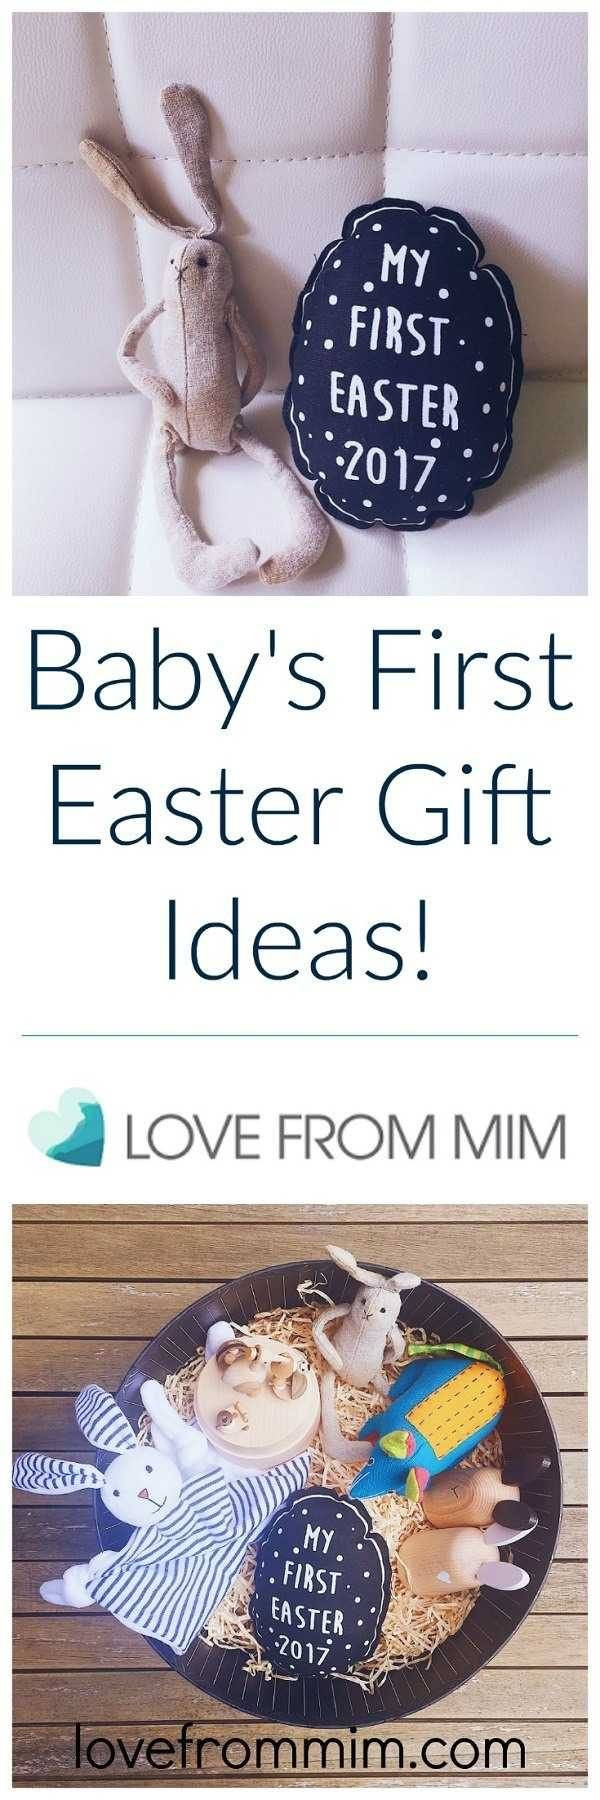 Gift Ideas For Baby'S First Easter
 Baby s First Easter Gift Ideas for all Bud s Love from Mim